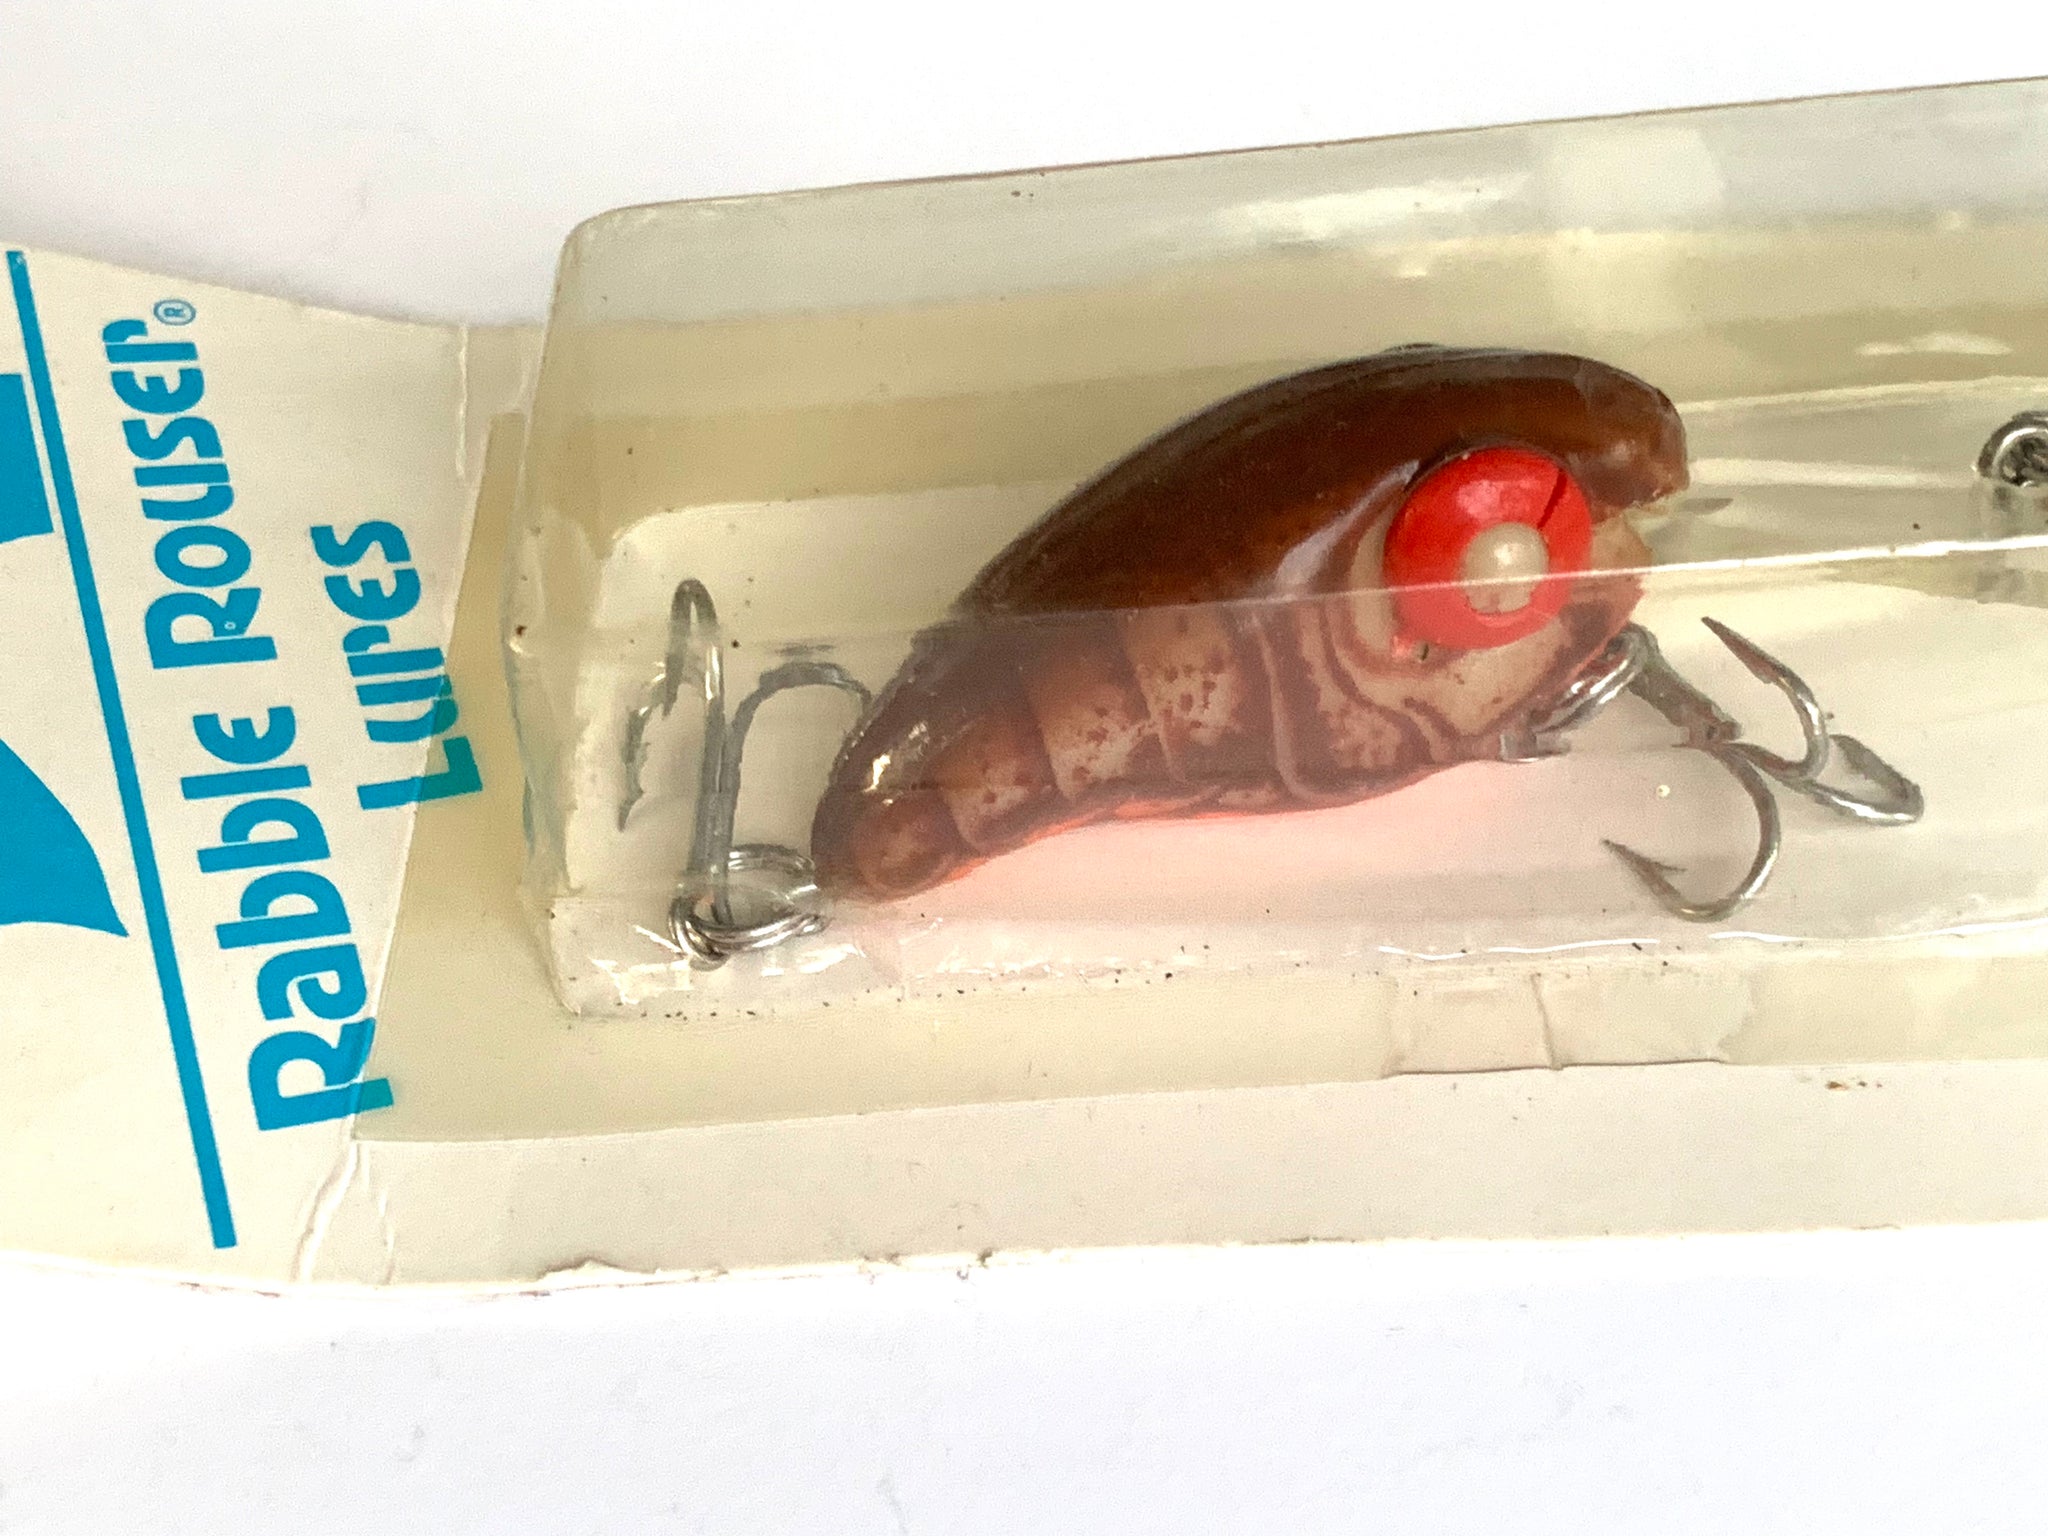 RABBLE ROUSER LURES ASHLEY PROBE Vintage Fishing Lure — CRAWDAD or